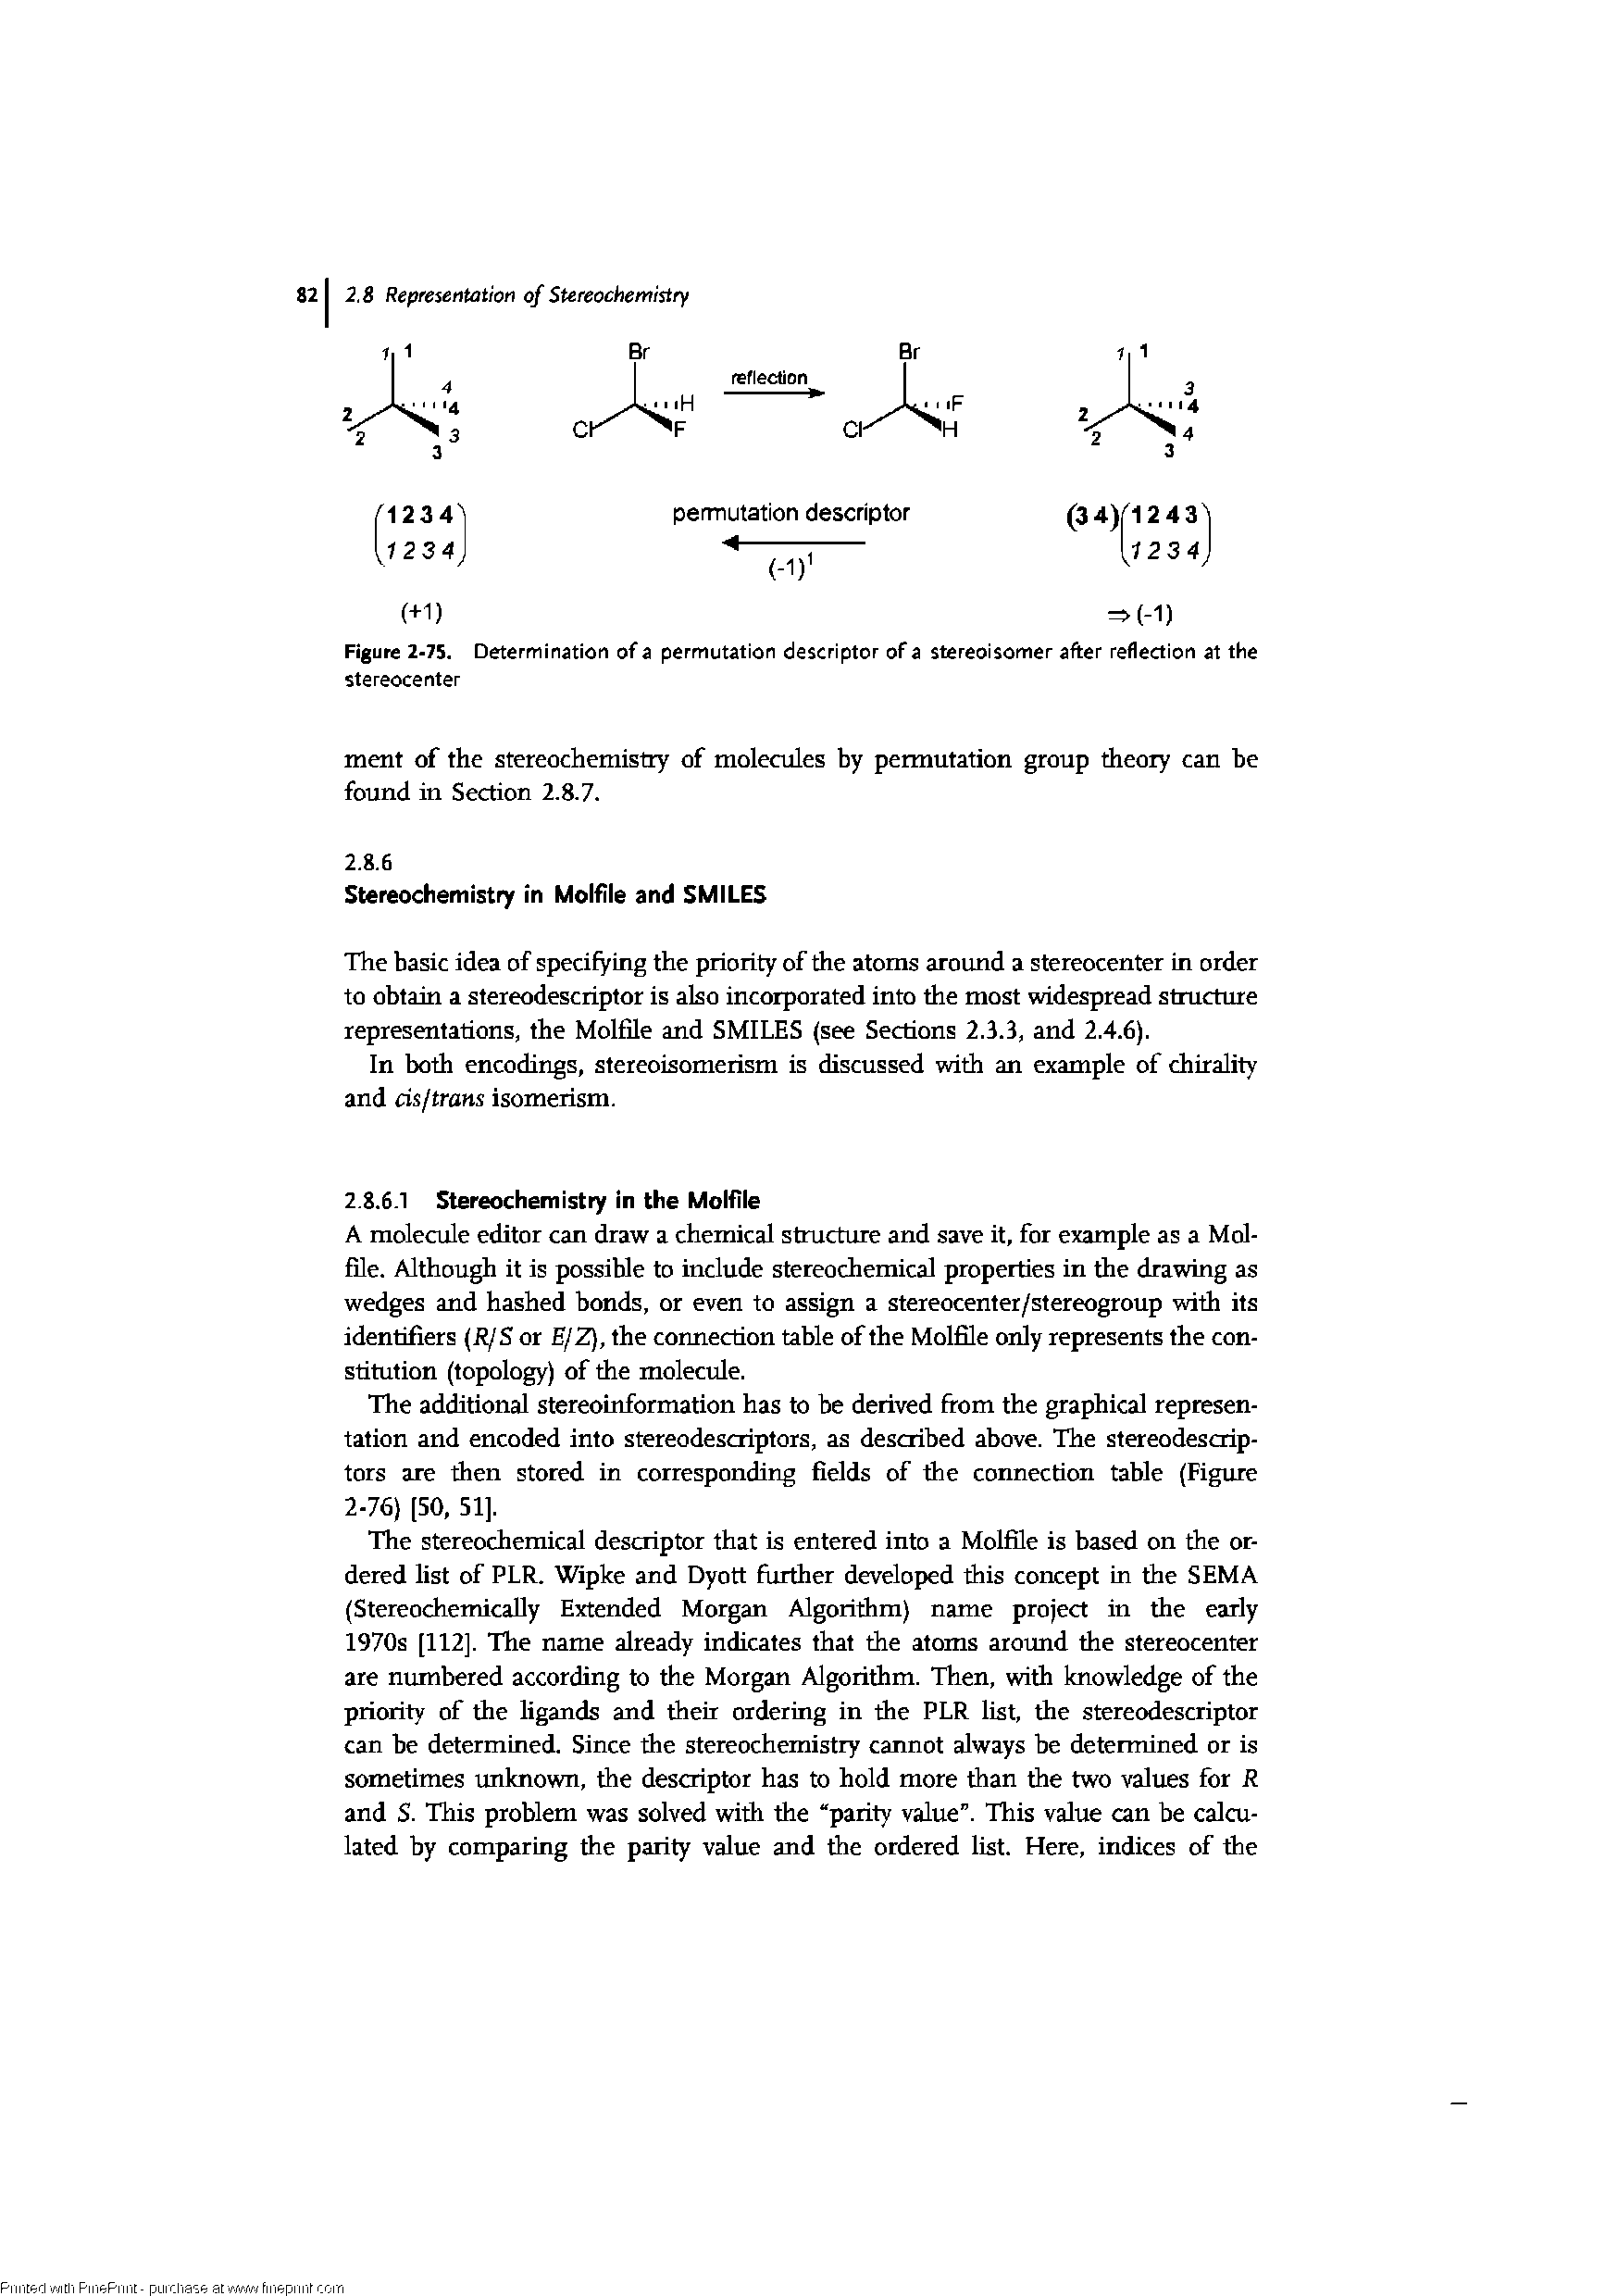 Figure 2-75. Determination of a permutation descriptor of a stereoisomer after reflection at the stereocenter...